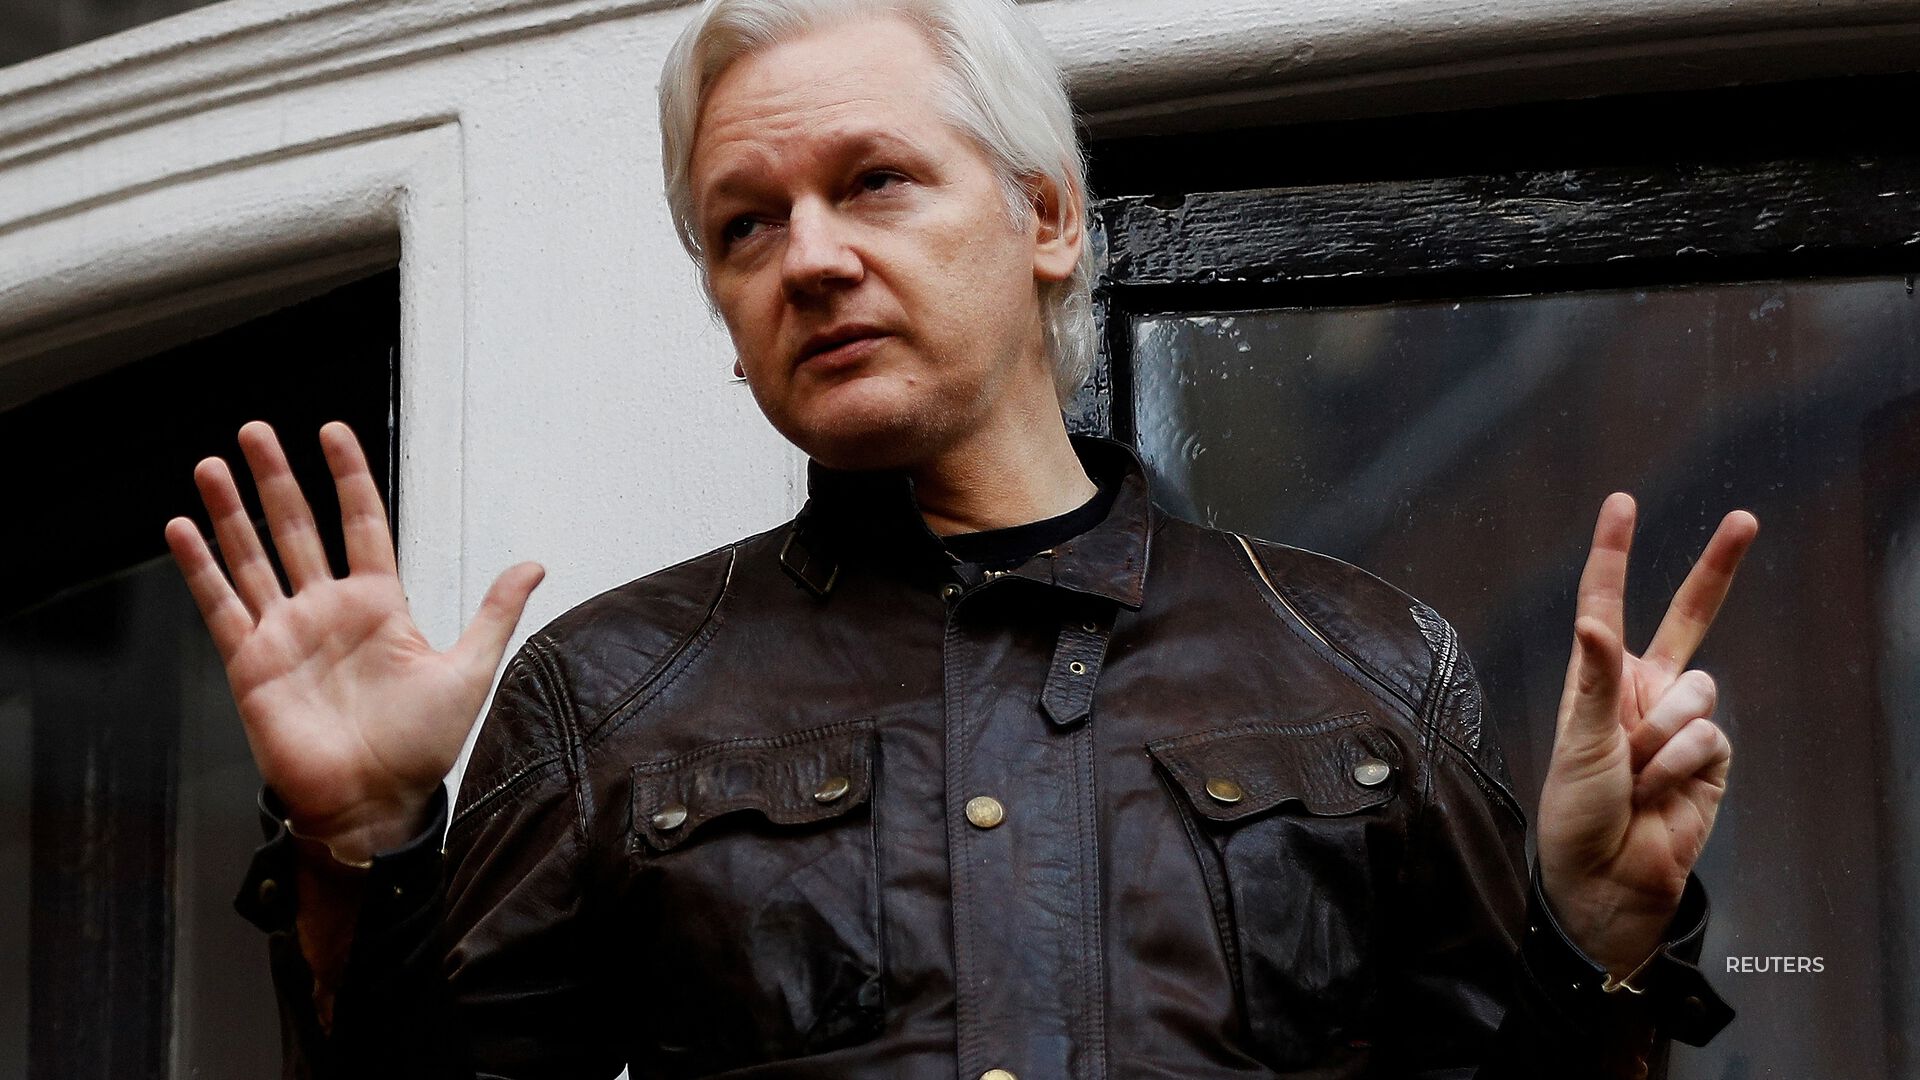 Assange, facing 18 charges, argued his extradition to the US was politically motivated and sought permission to review his case.